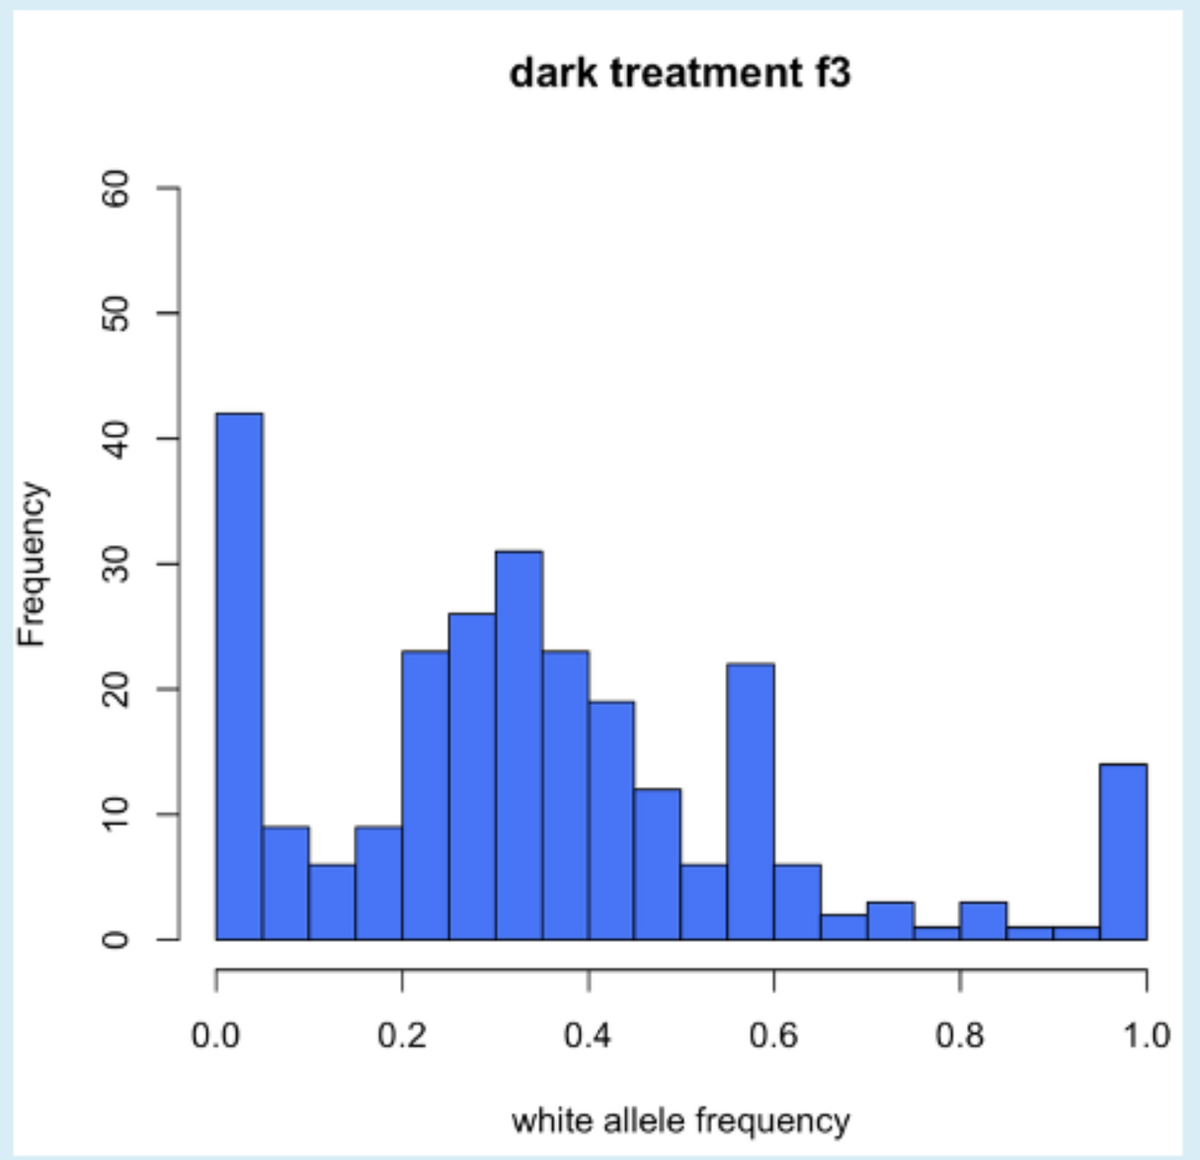 dark treatment f3
50
20
10
0.0
0.2
0.4
0.6
0.8
1.0
white allele frequency
09
Frequency
